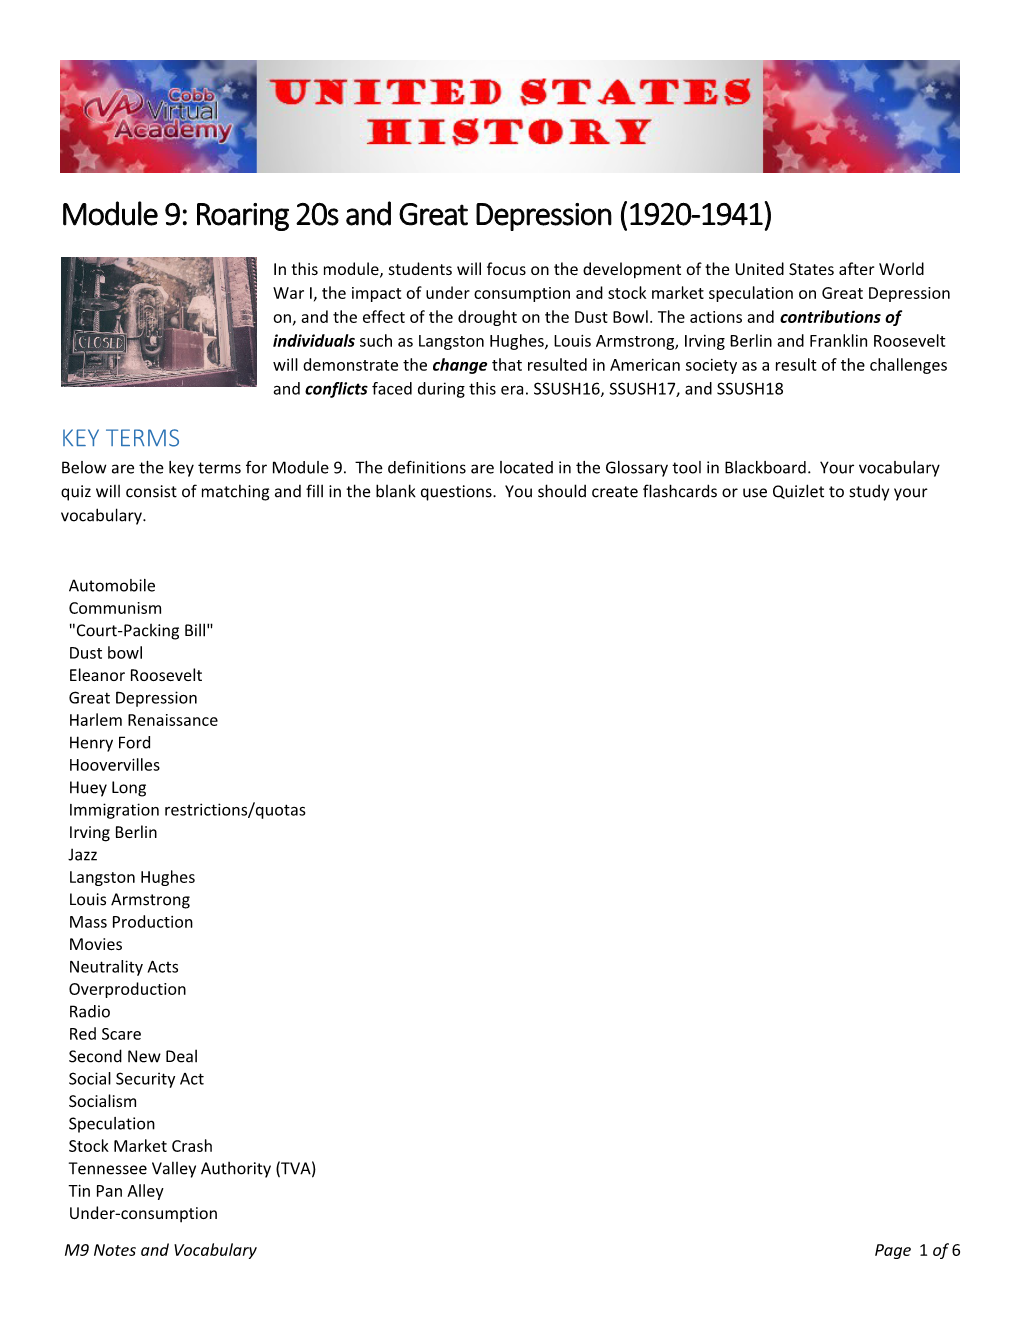 Module 9: Roaring 20S and Great Depression (1920-1941)